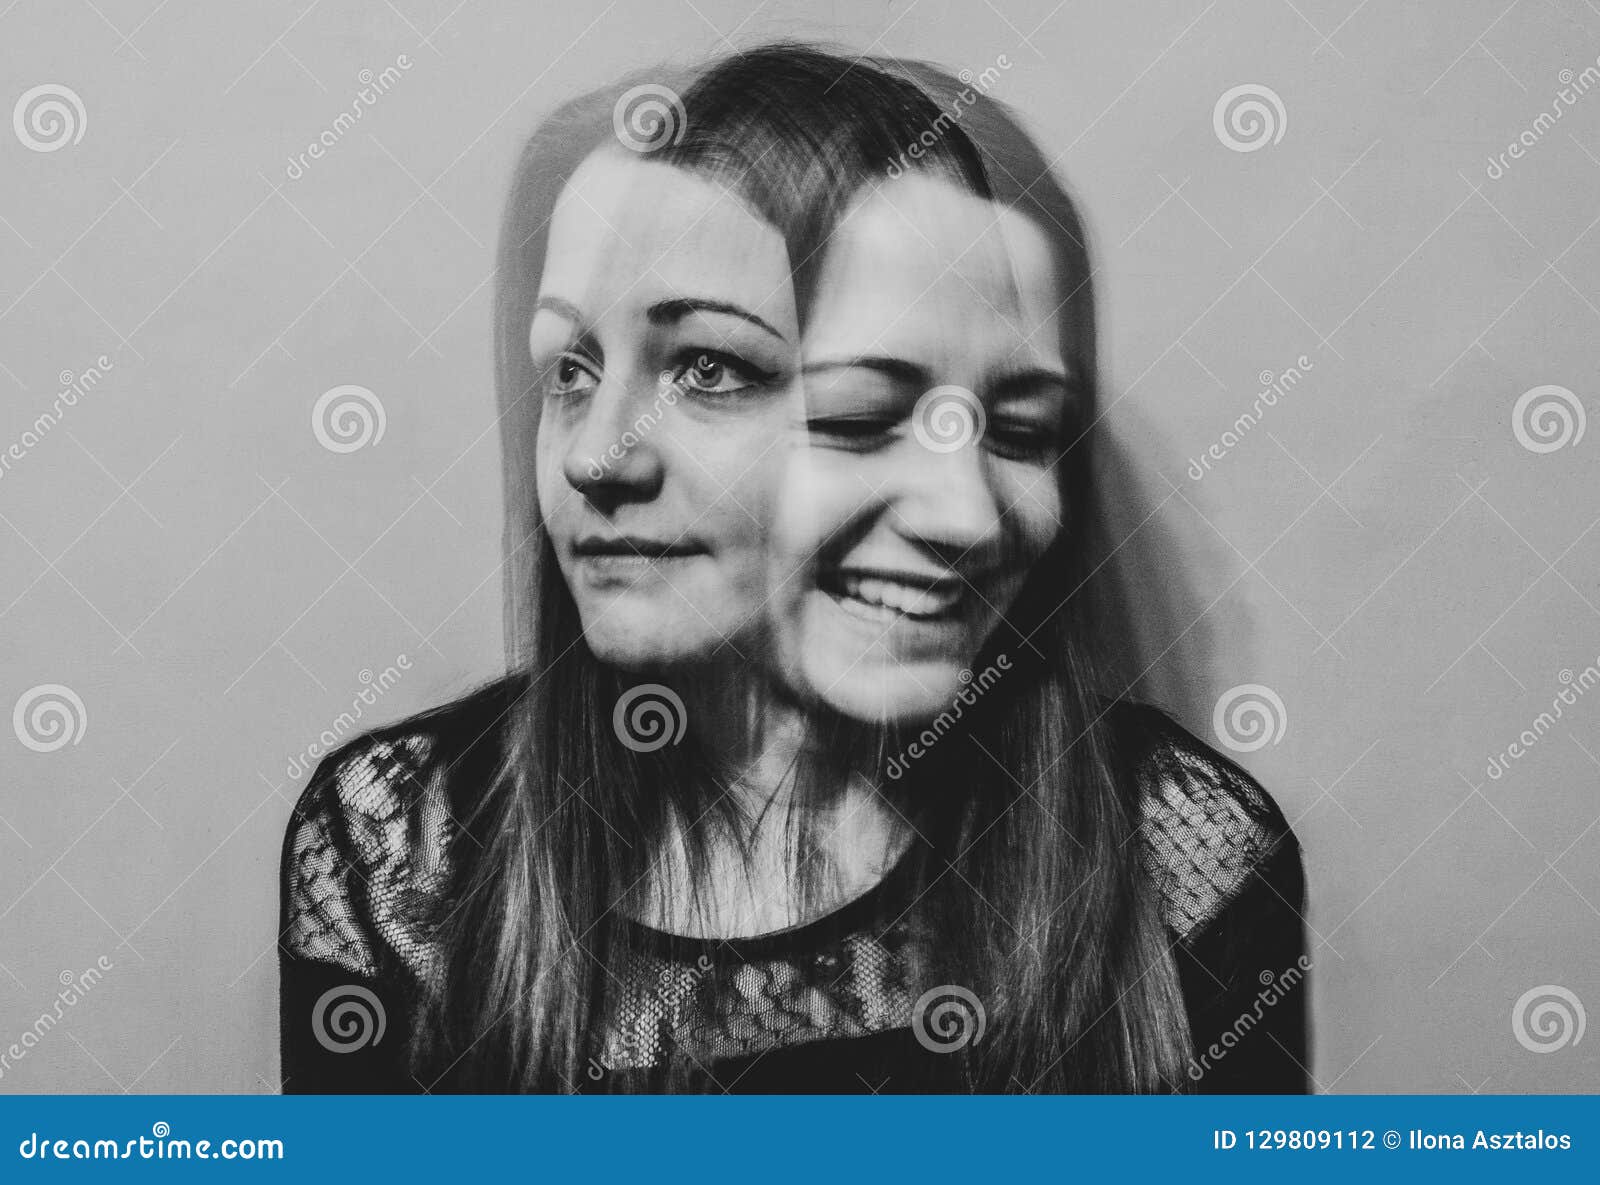 Double face self-portrait stock photo. Image of lady - 129809112